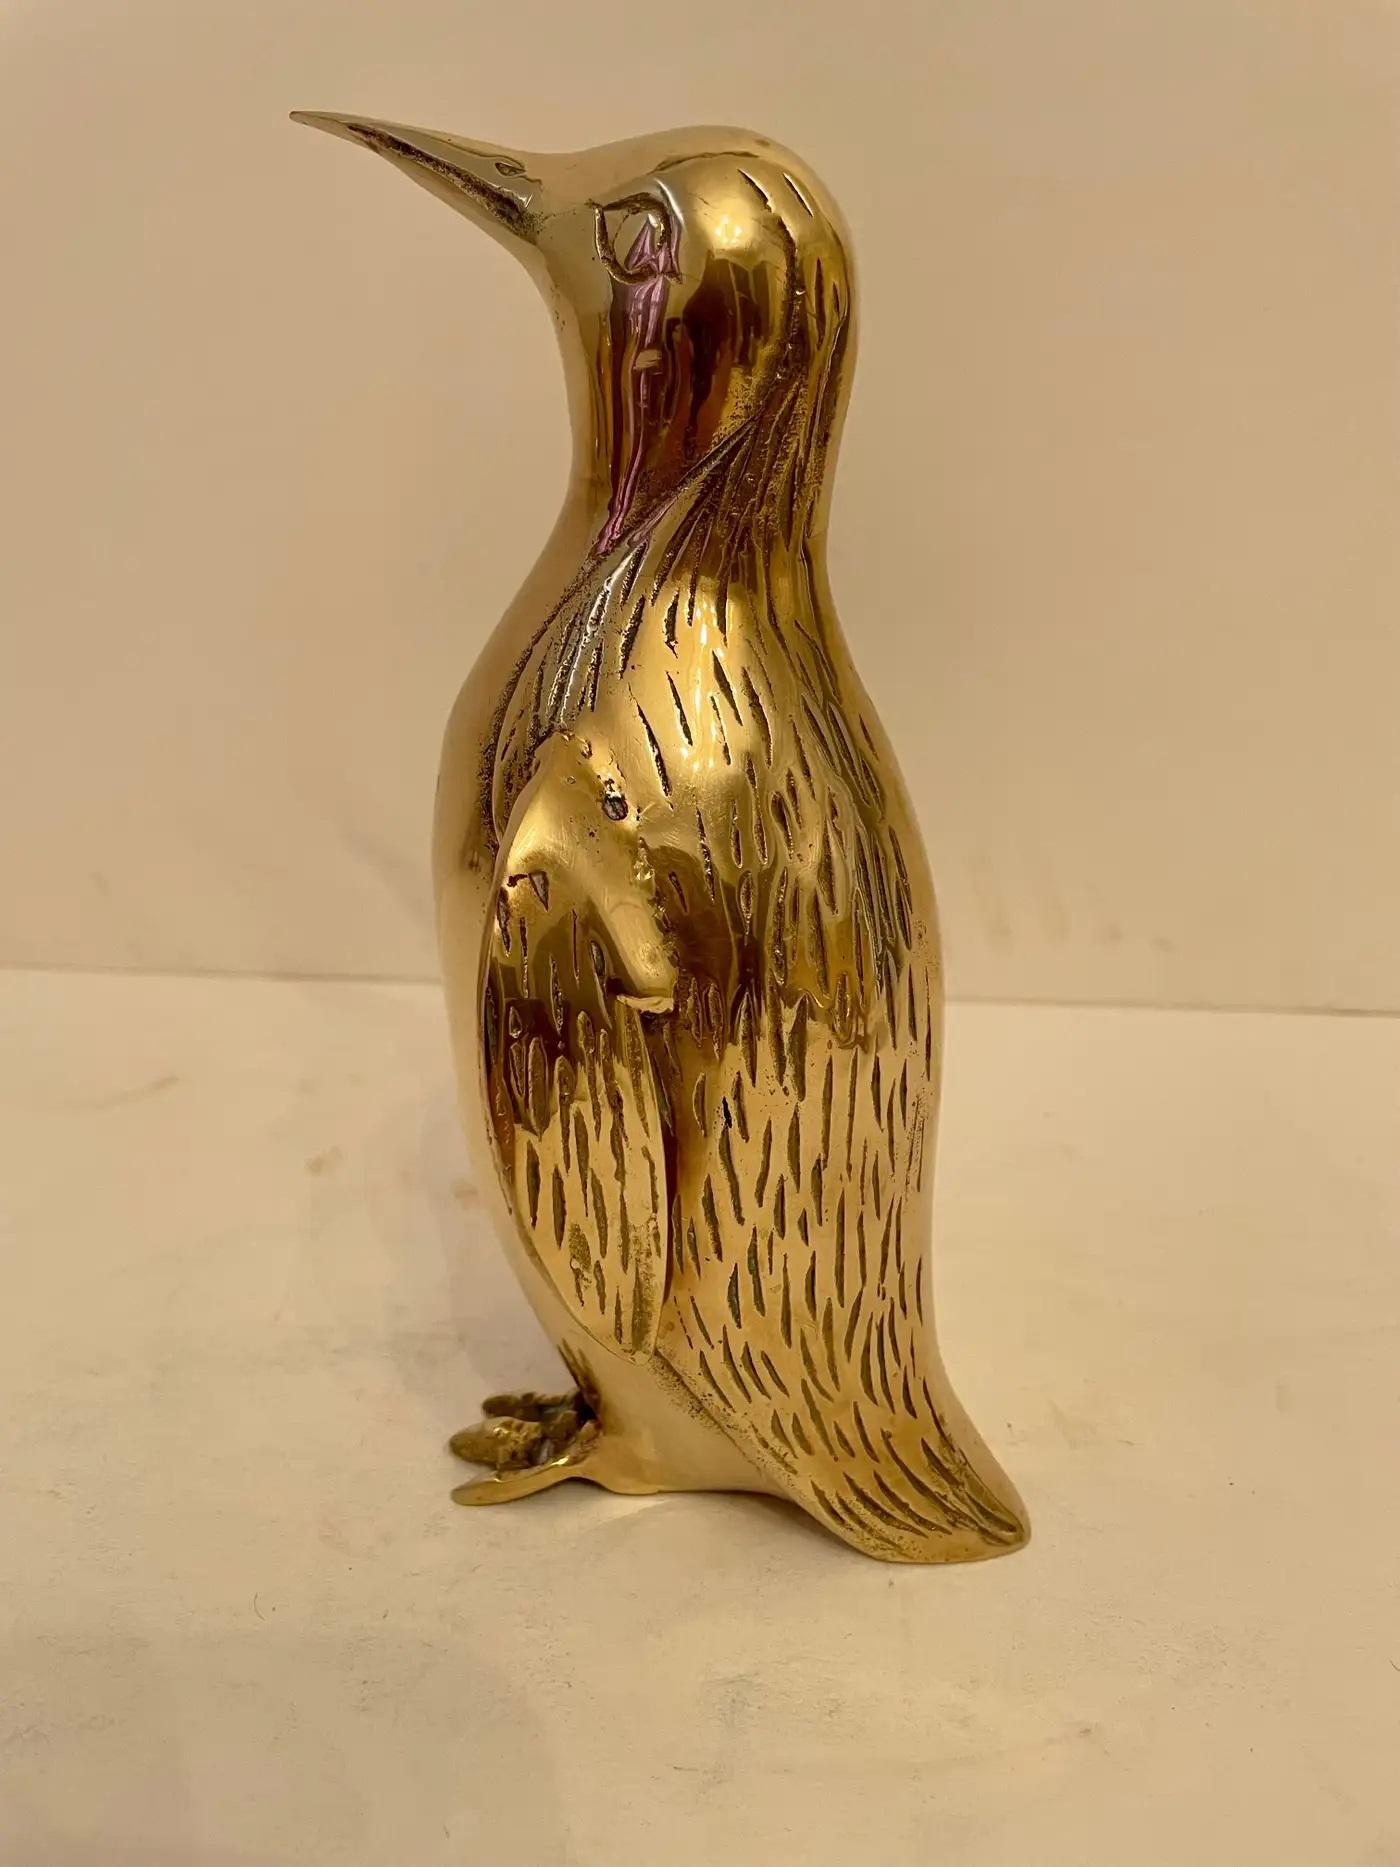 Vintage Hollywood Regency brass Penguin sculpture. Nicely detailed. Hand polished. Good overall condition. Dark spots are reflection of light in photos. Measures 8” tall x 4” wide x 4.25” deep. QUICK SHIP